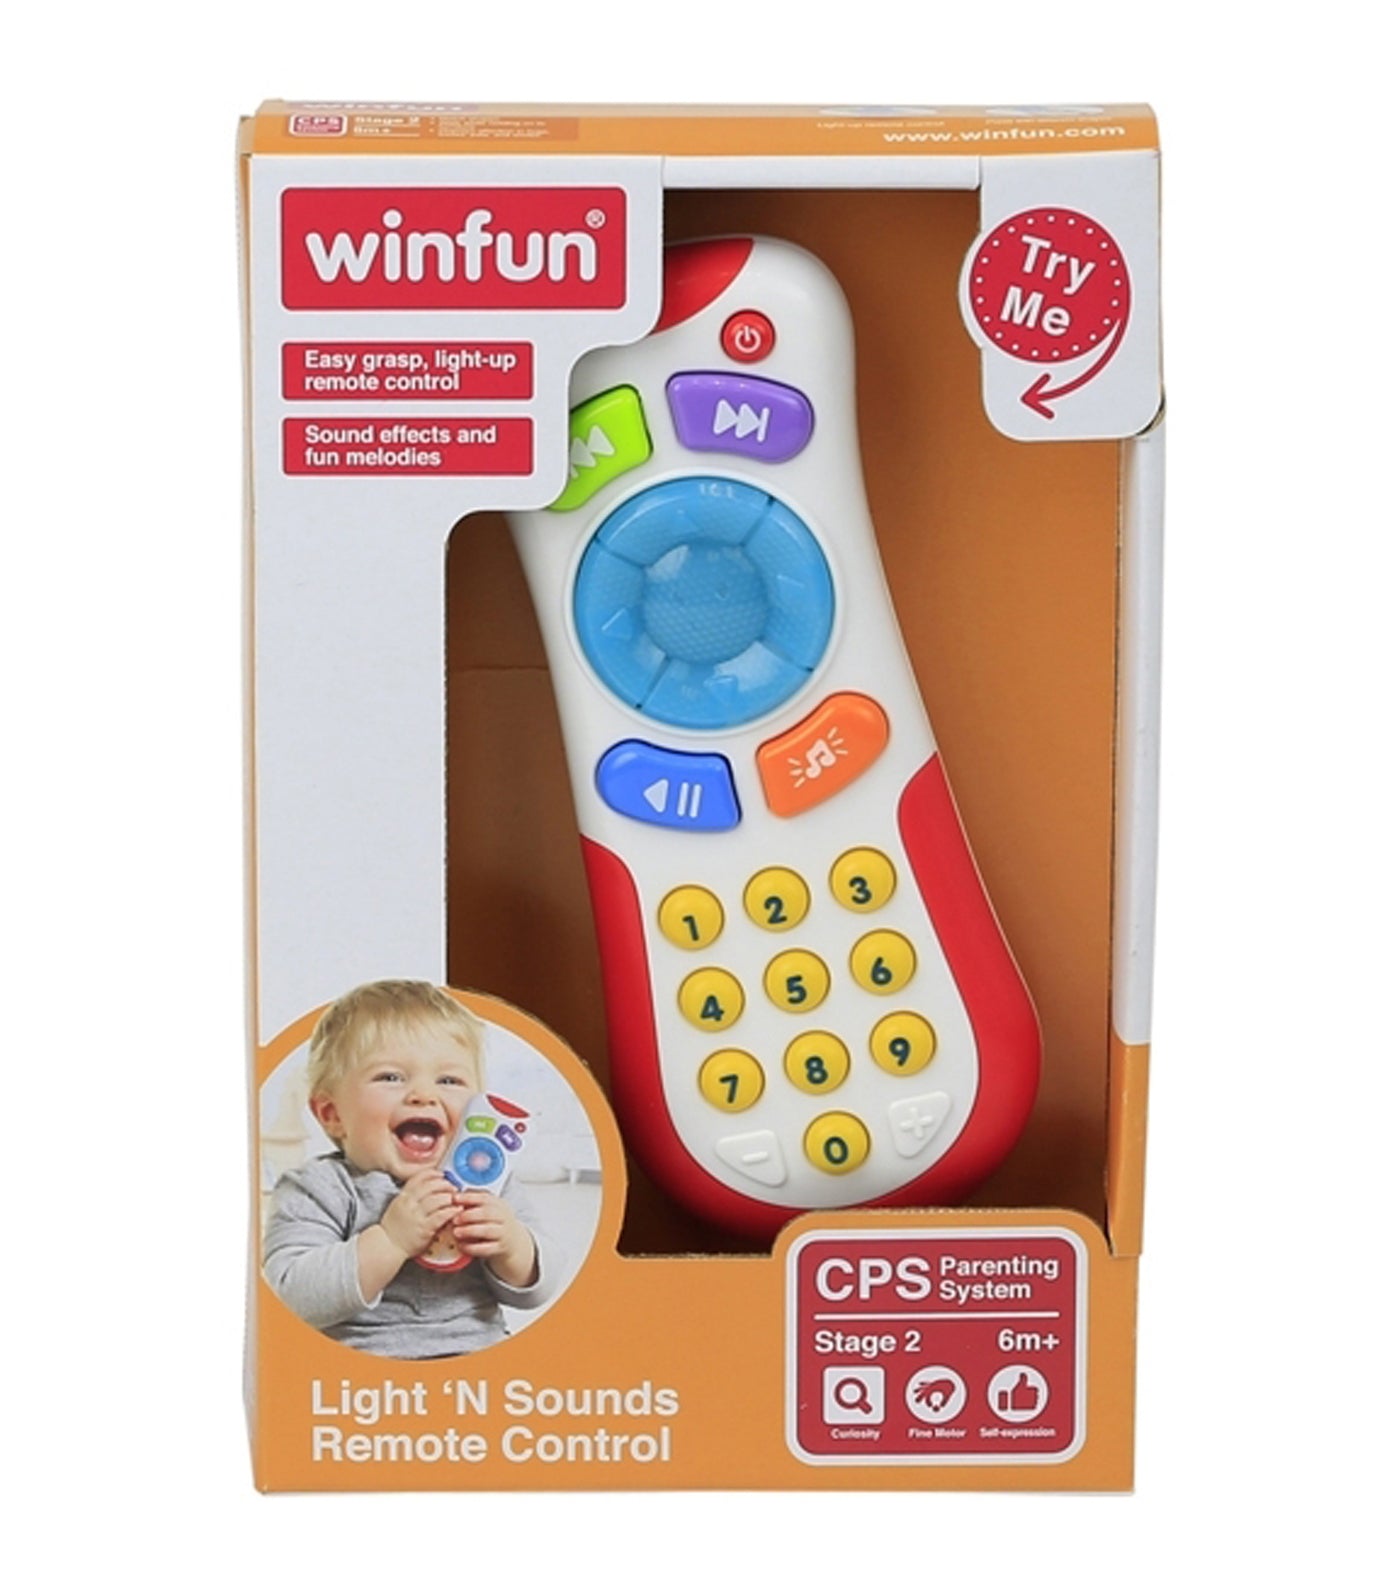 Light 'N Sounds Remote Control